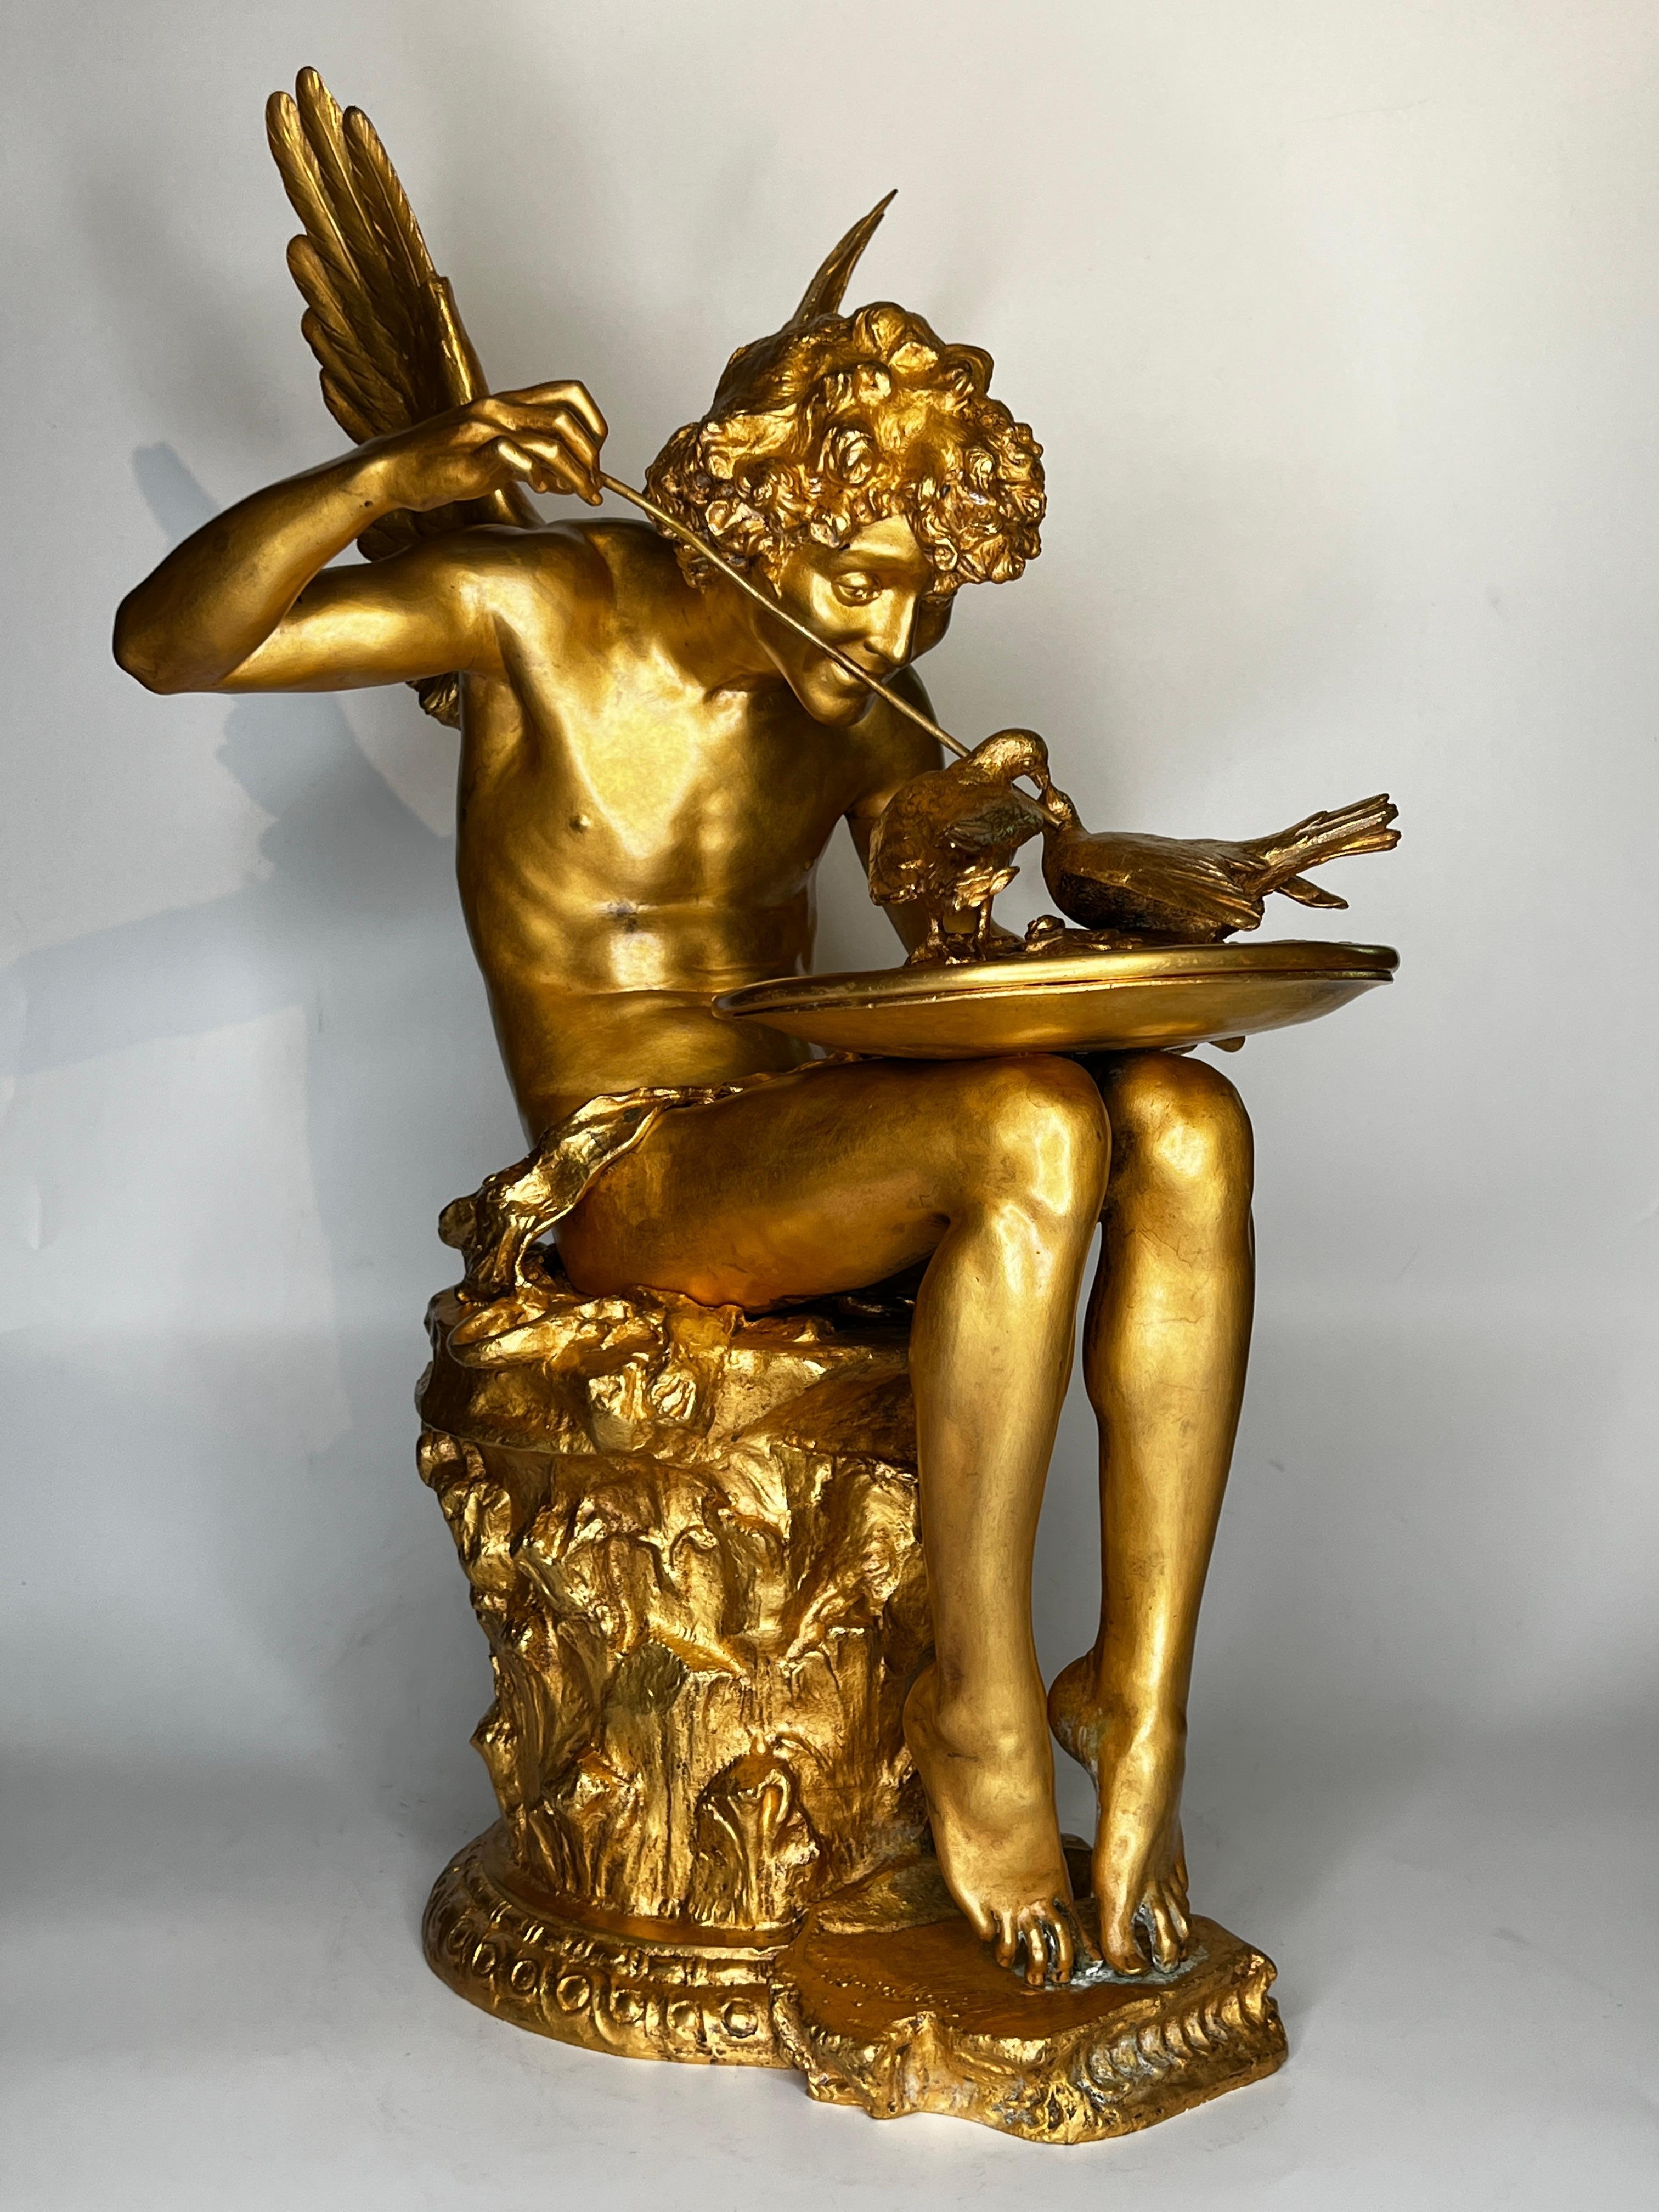 Our gilt bronze sculpture after Jean Antoine Injalbert (1845-1933) is known as Amour aux Colombes (Love with Birds).